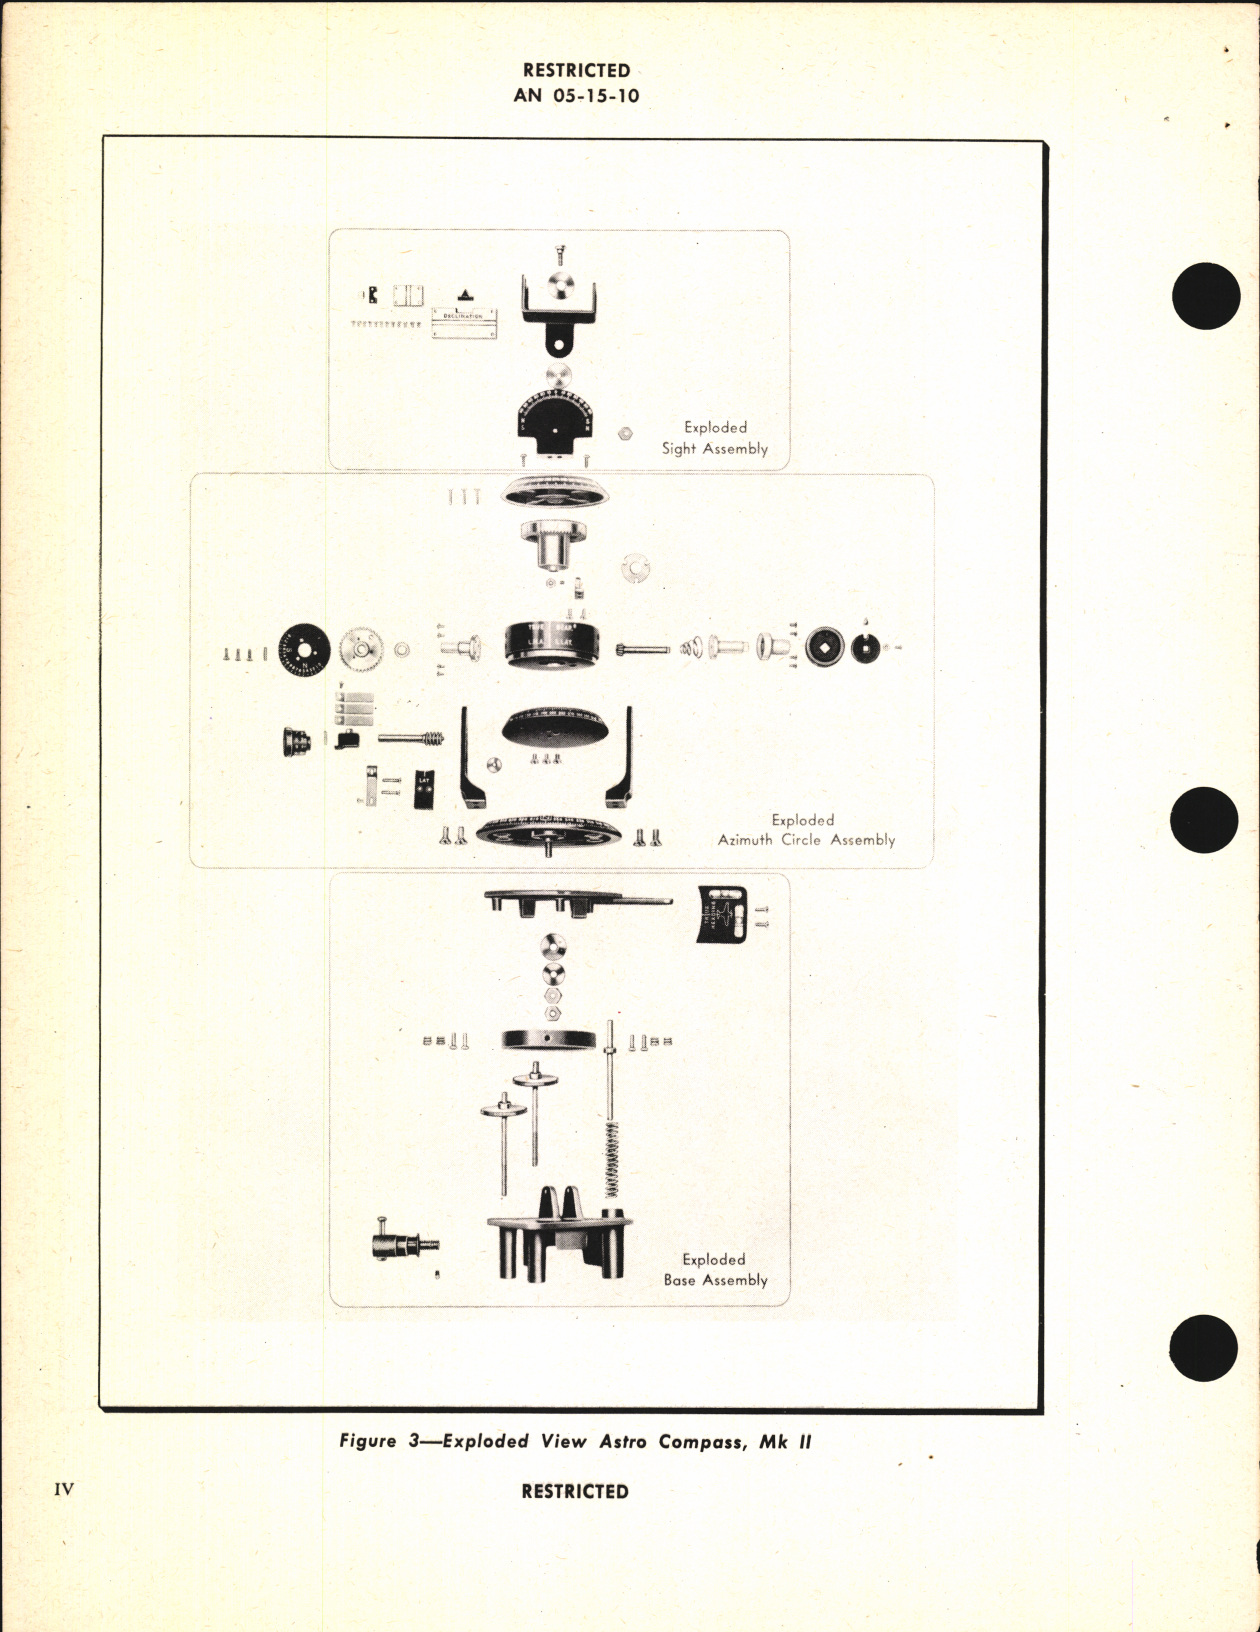 Sample page 8 from AirCorps Library document: Handbook of Instructions with Parts Catalog for Mark II Astro Compass